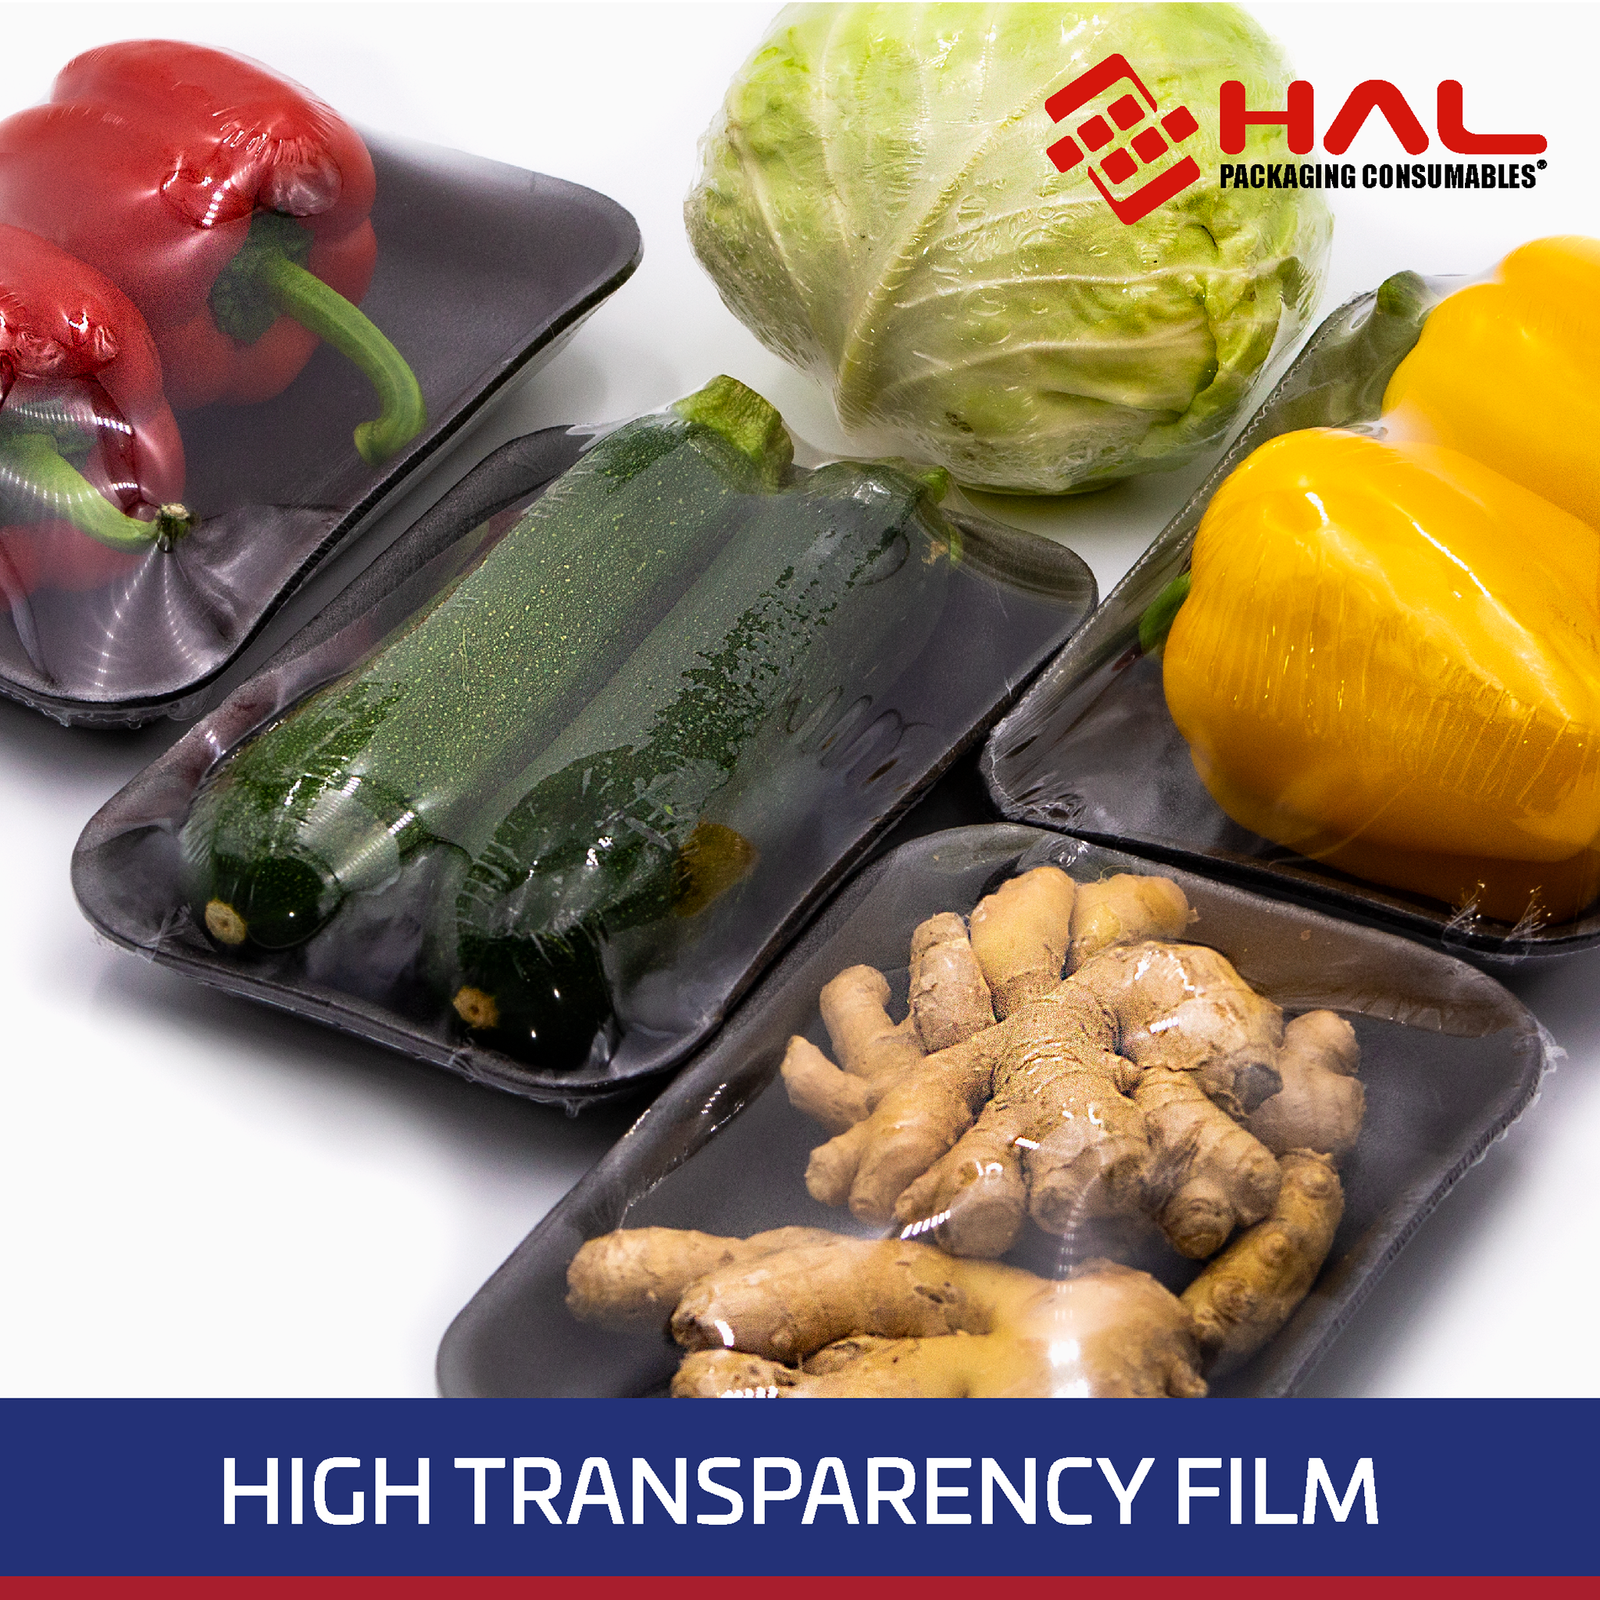 Several food items shrink packaged for protection. Blue and white text on the bottom says High transparency film